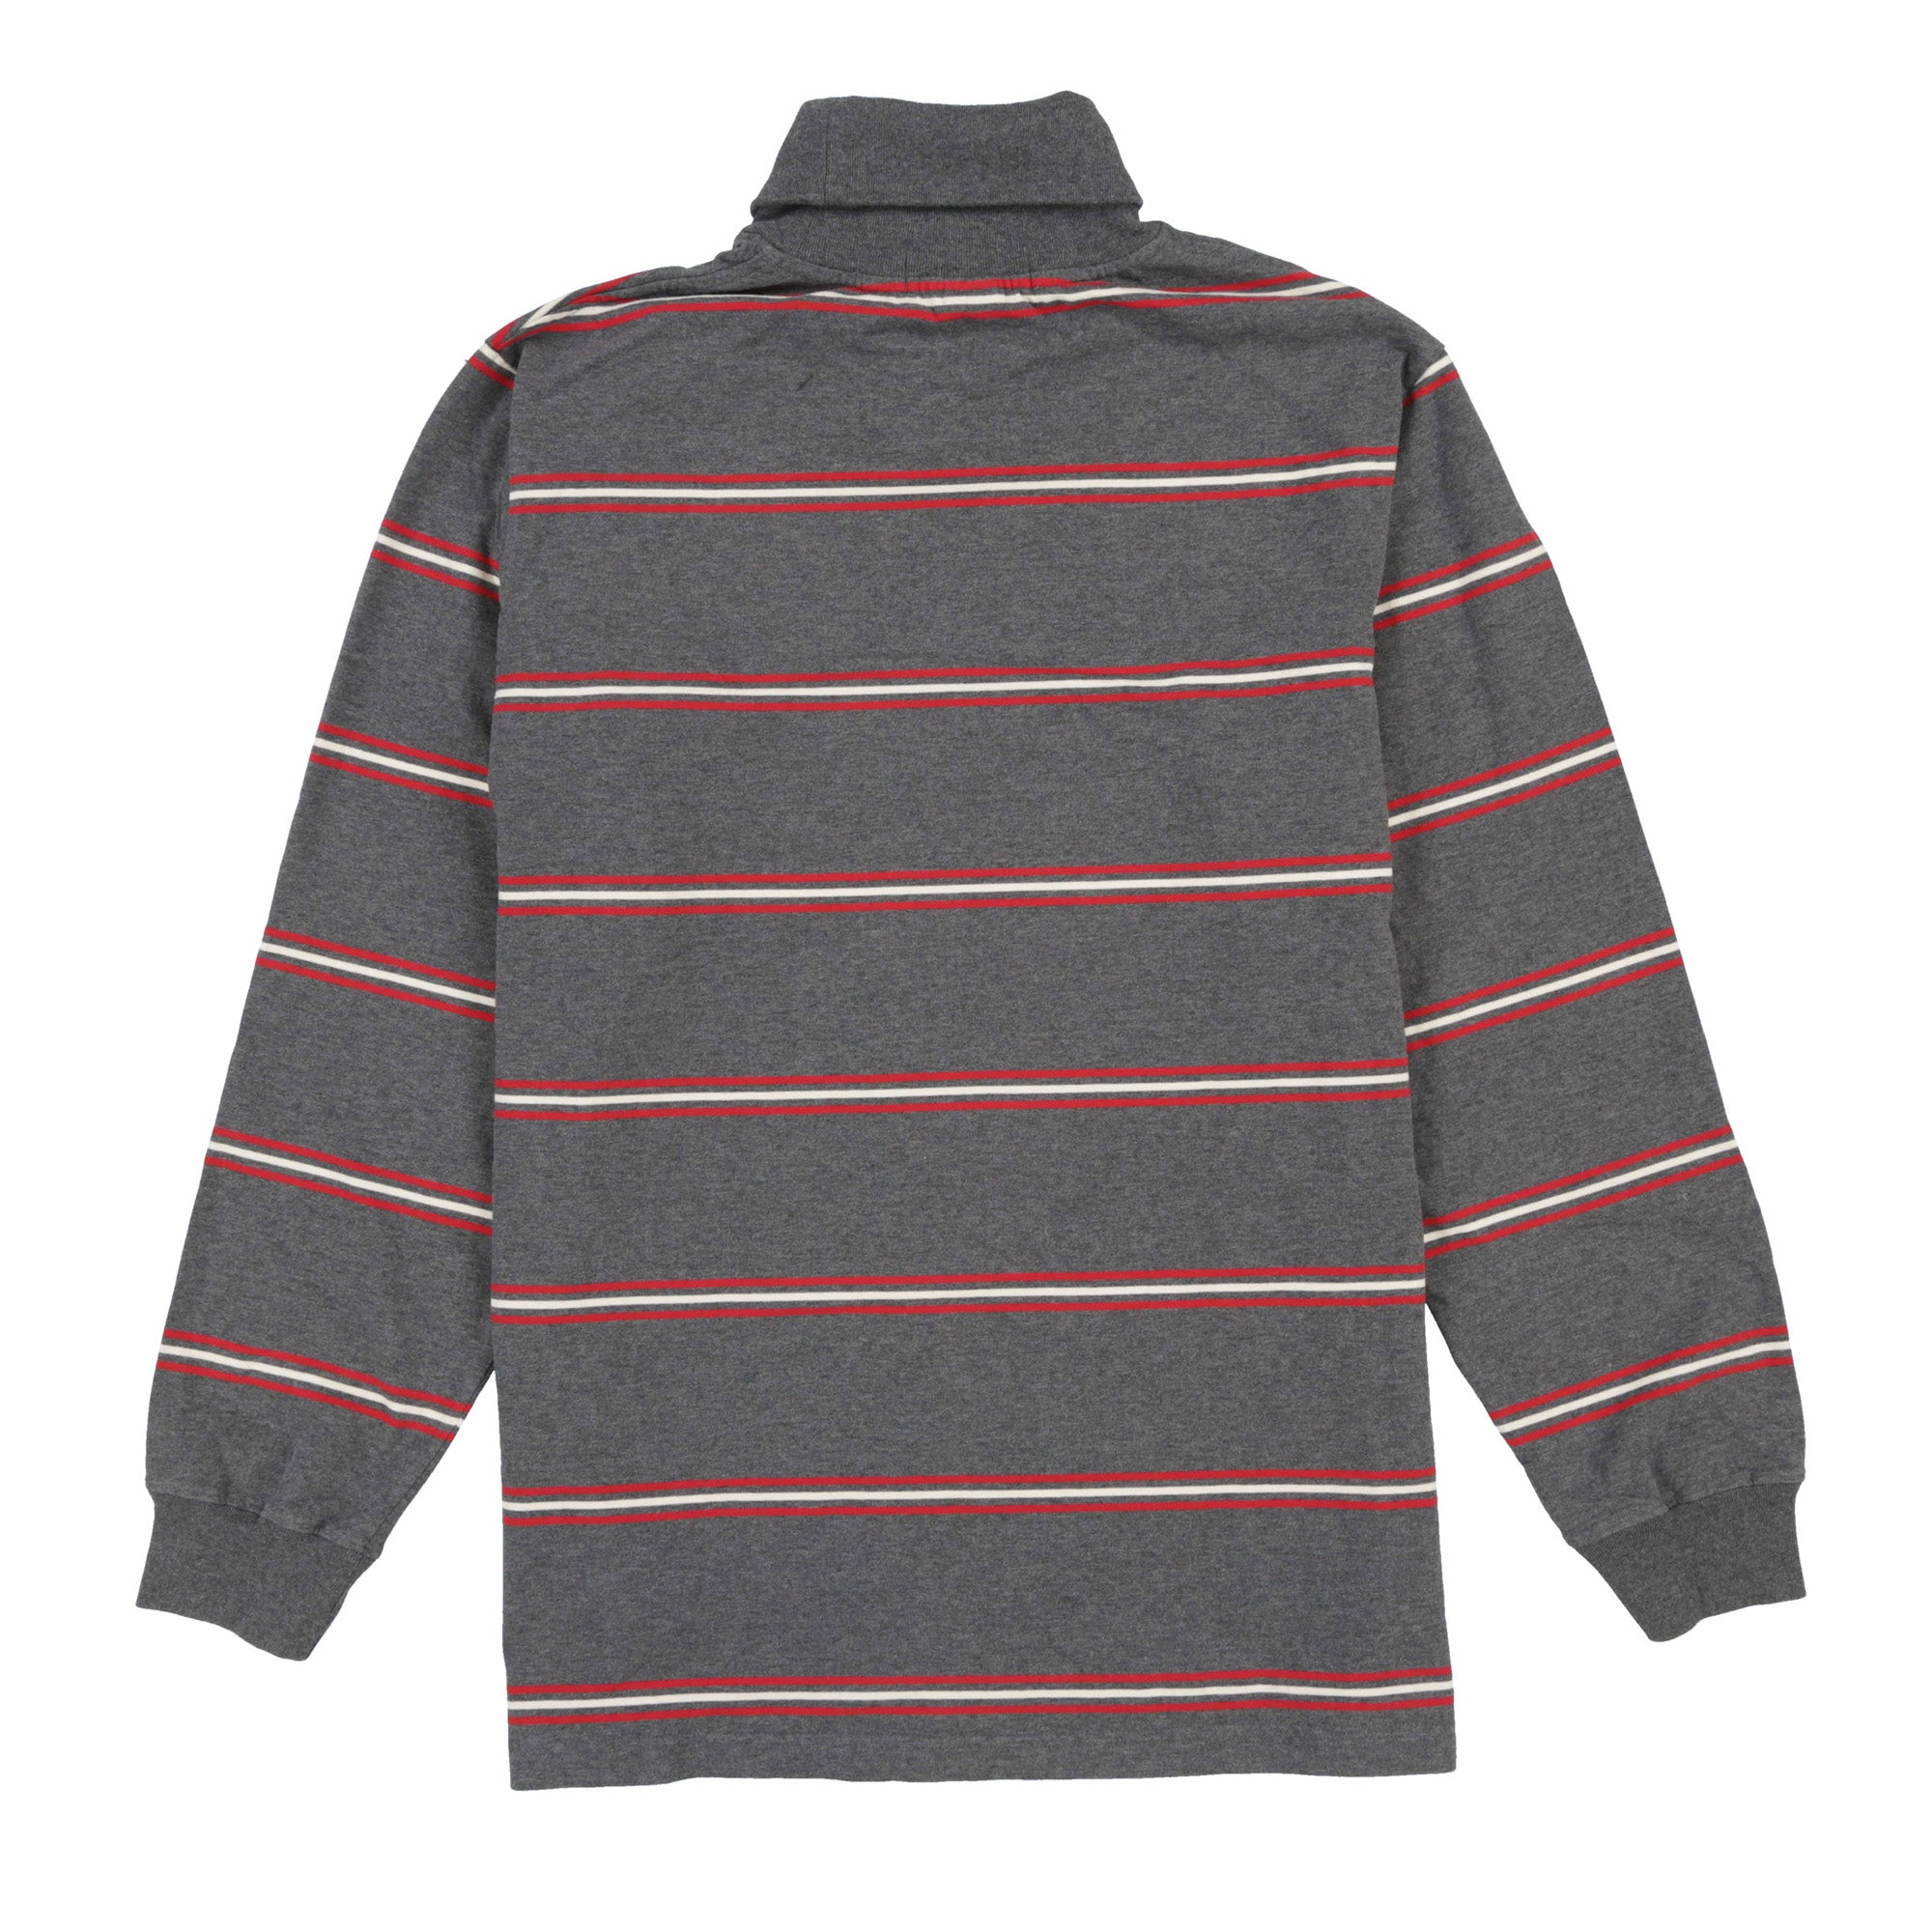 POLO SPORT EMB SPELL OUT STRIPE TURTLENECK // GREY WHITE RED